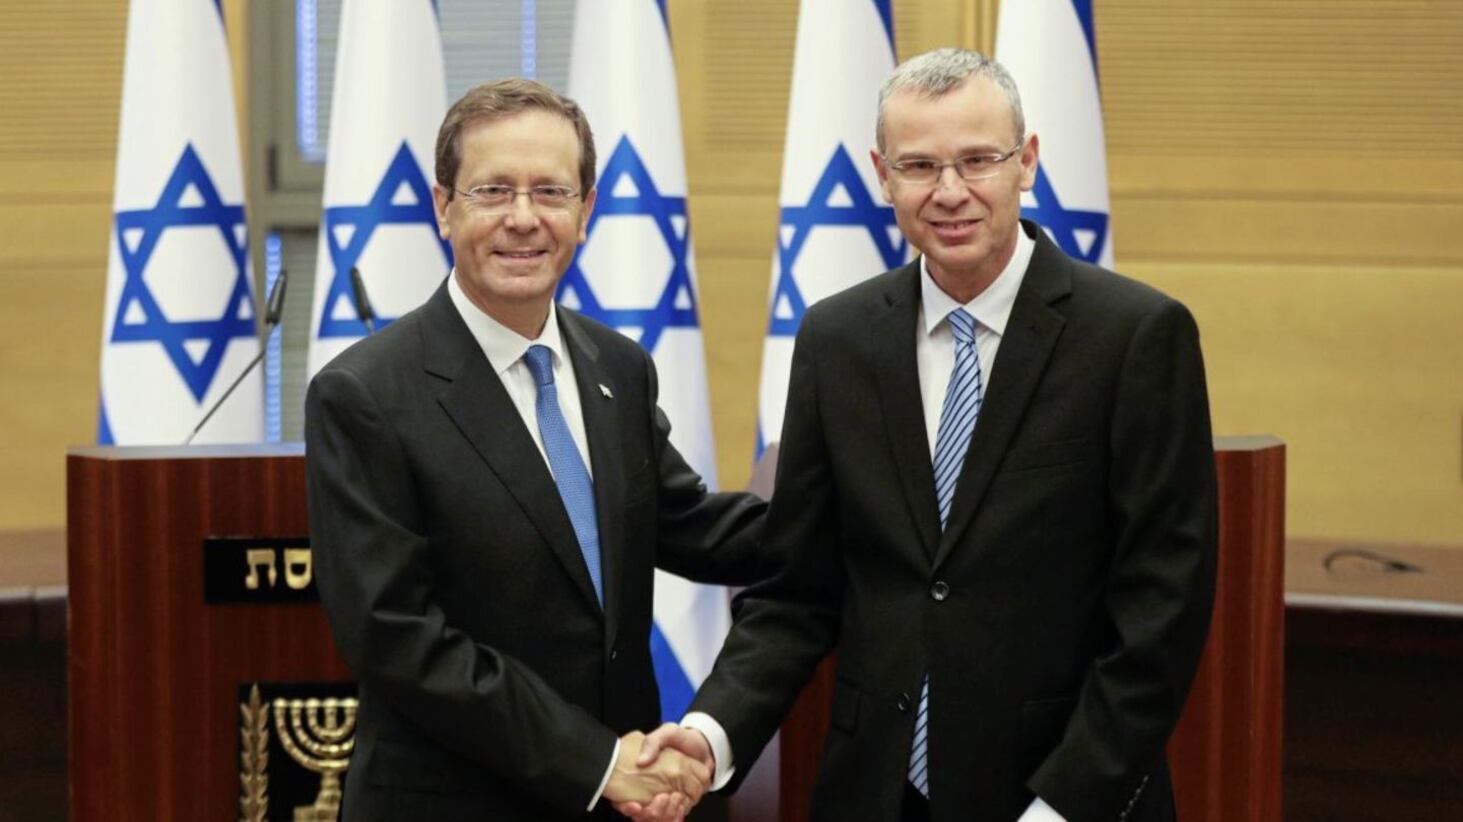 Isaac Herzog shakes hands with Yariv Levin, Speaker of the Knesset. Picture by Ronen Zvulun/Pool Photo via AP 